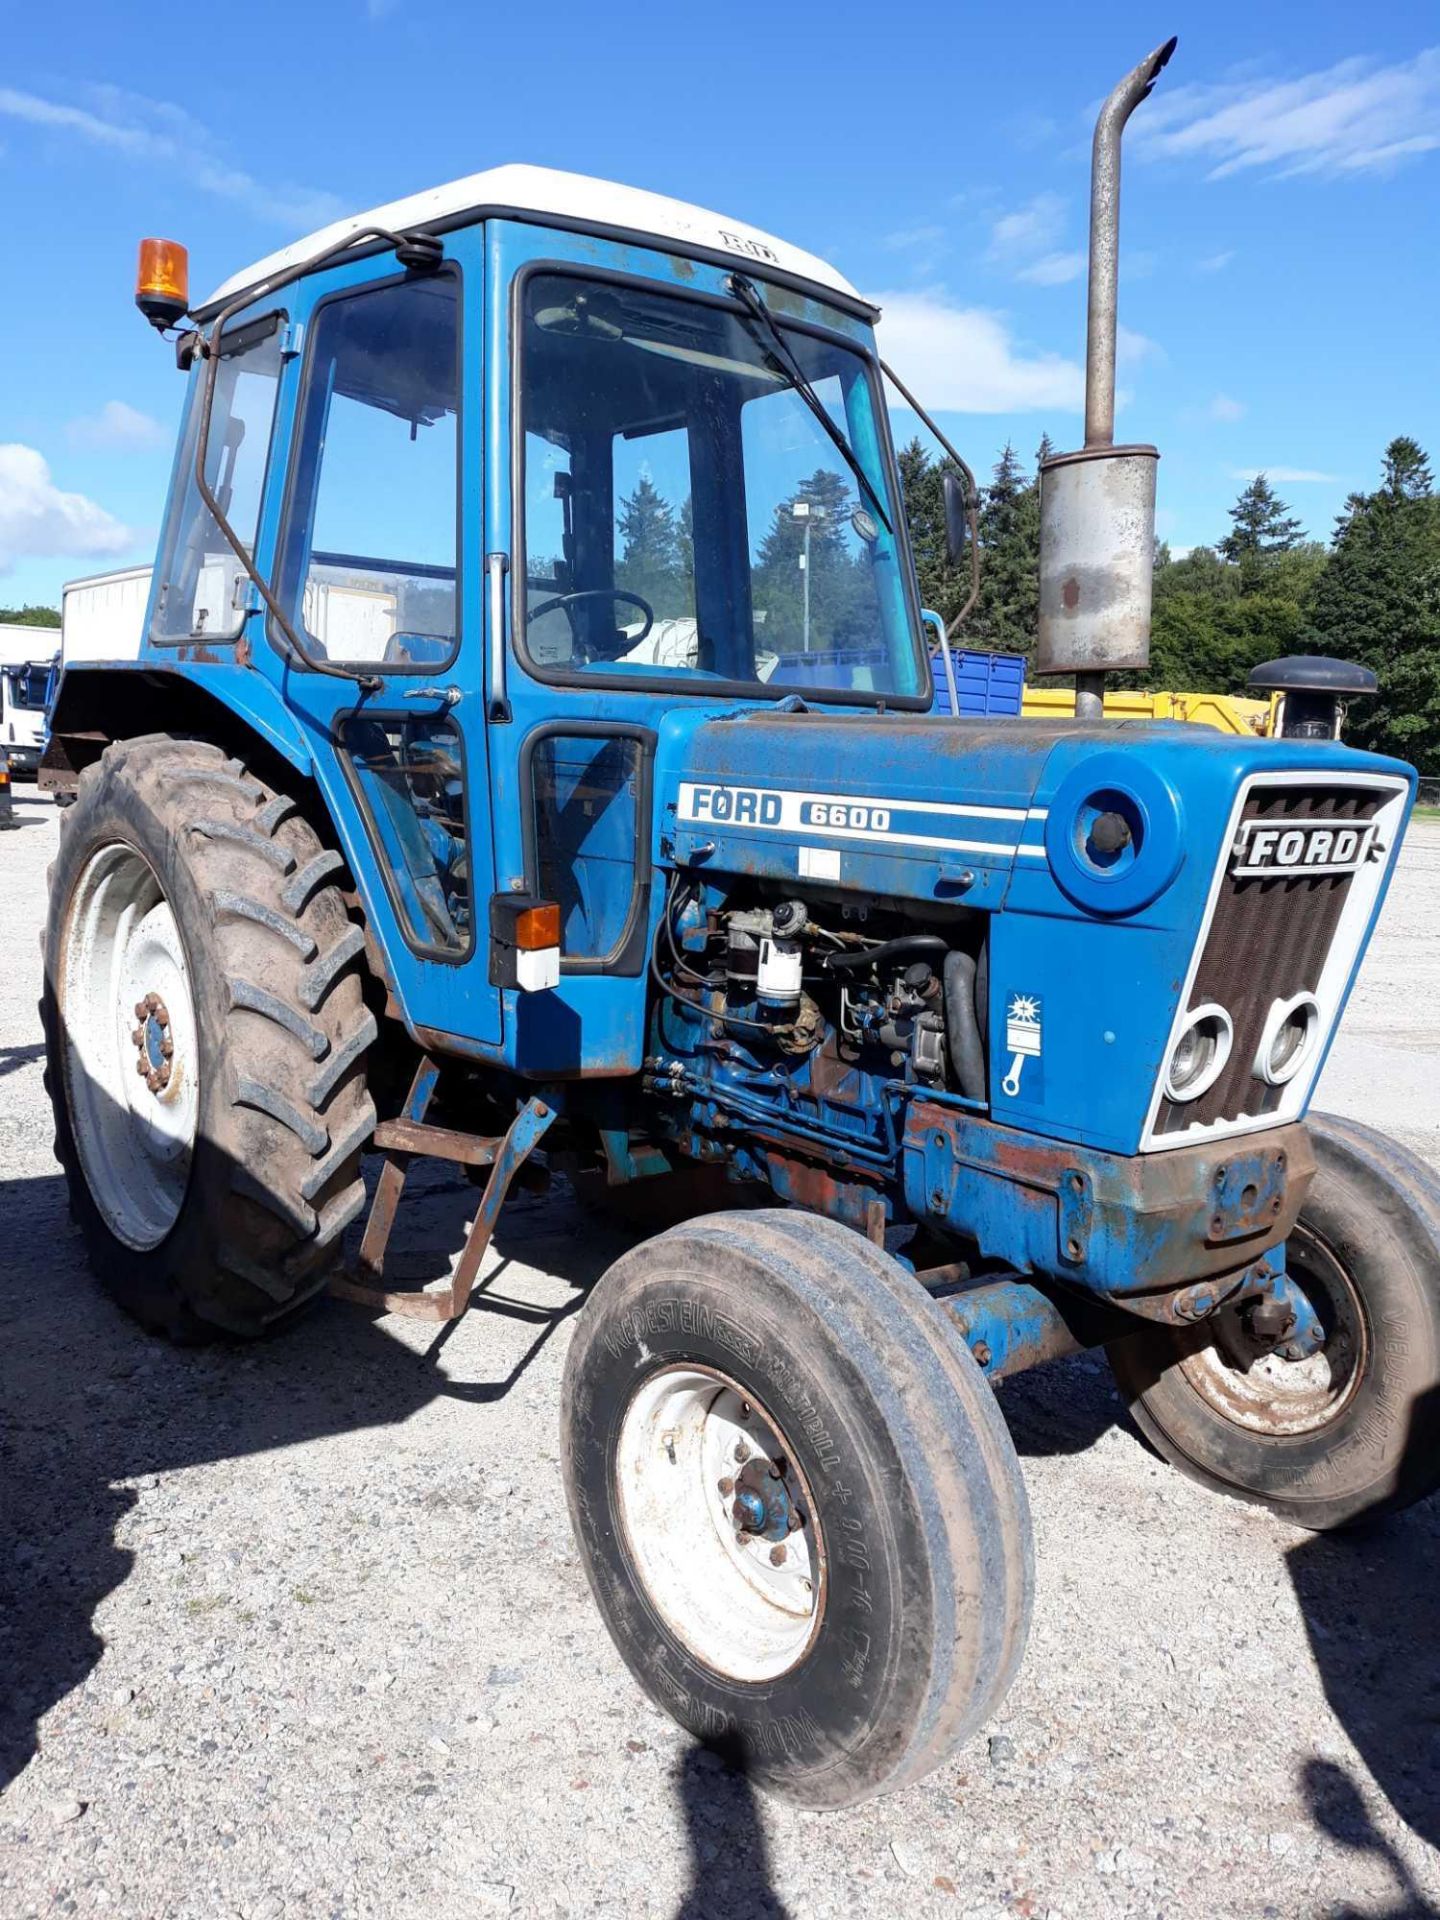 Ford Cargo 1615 - 0cc Tractor - Image 2 of 8